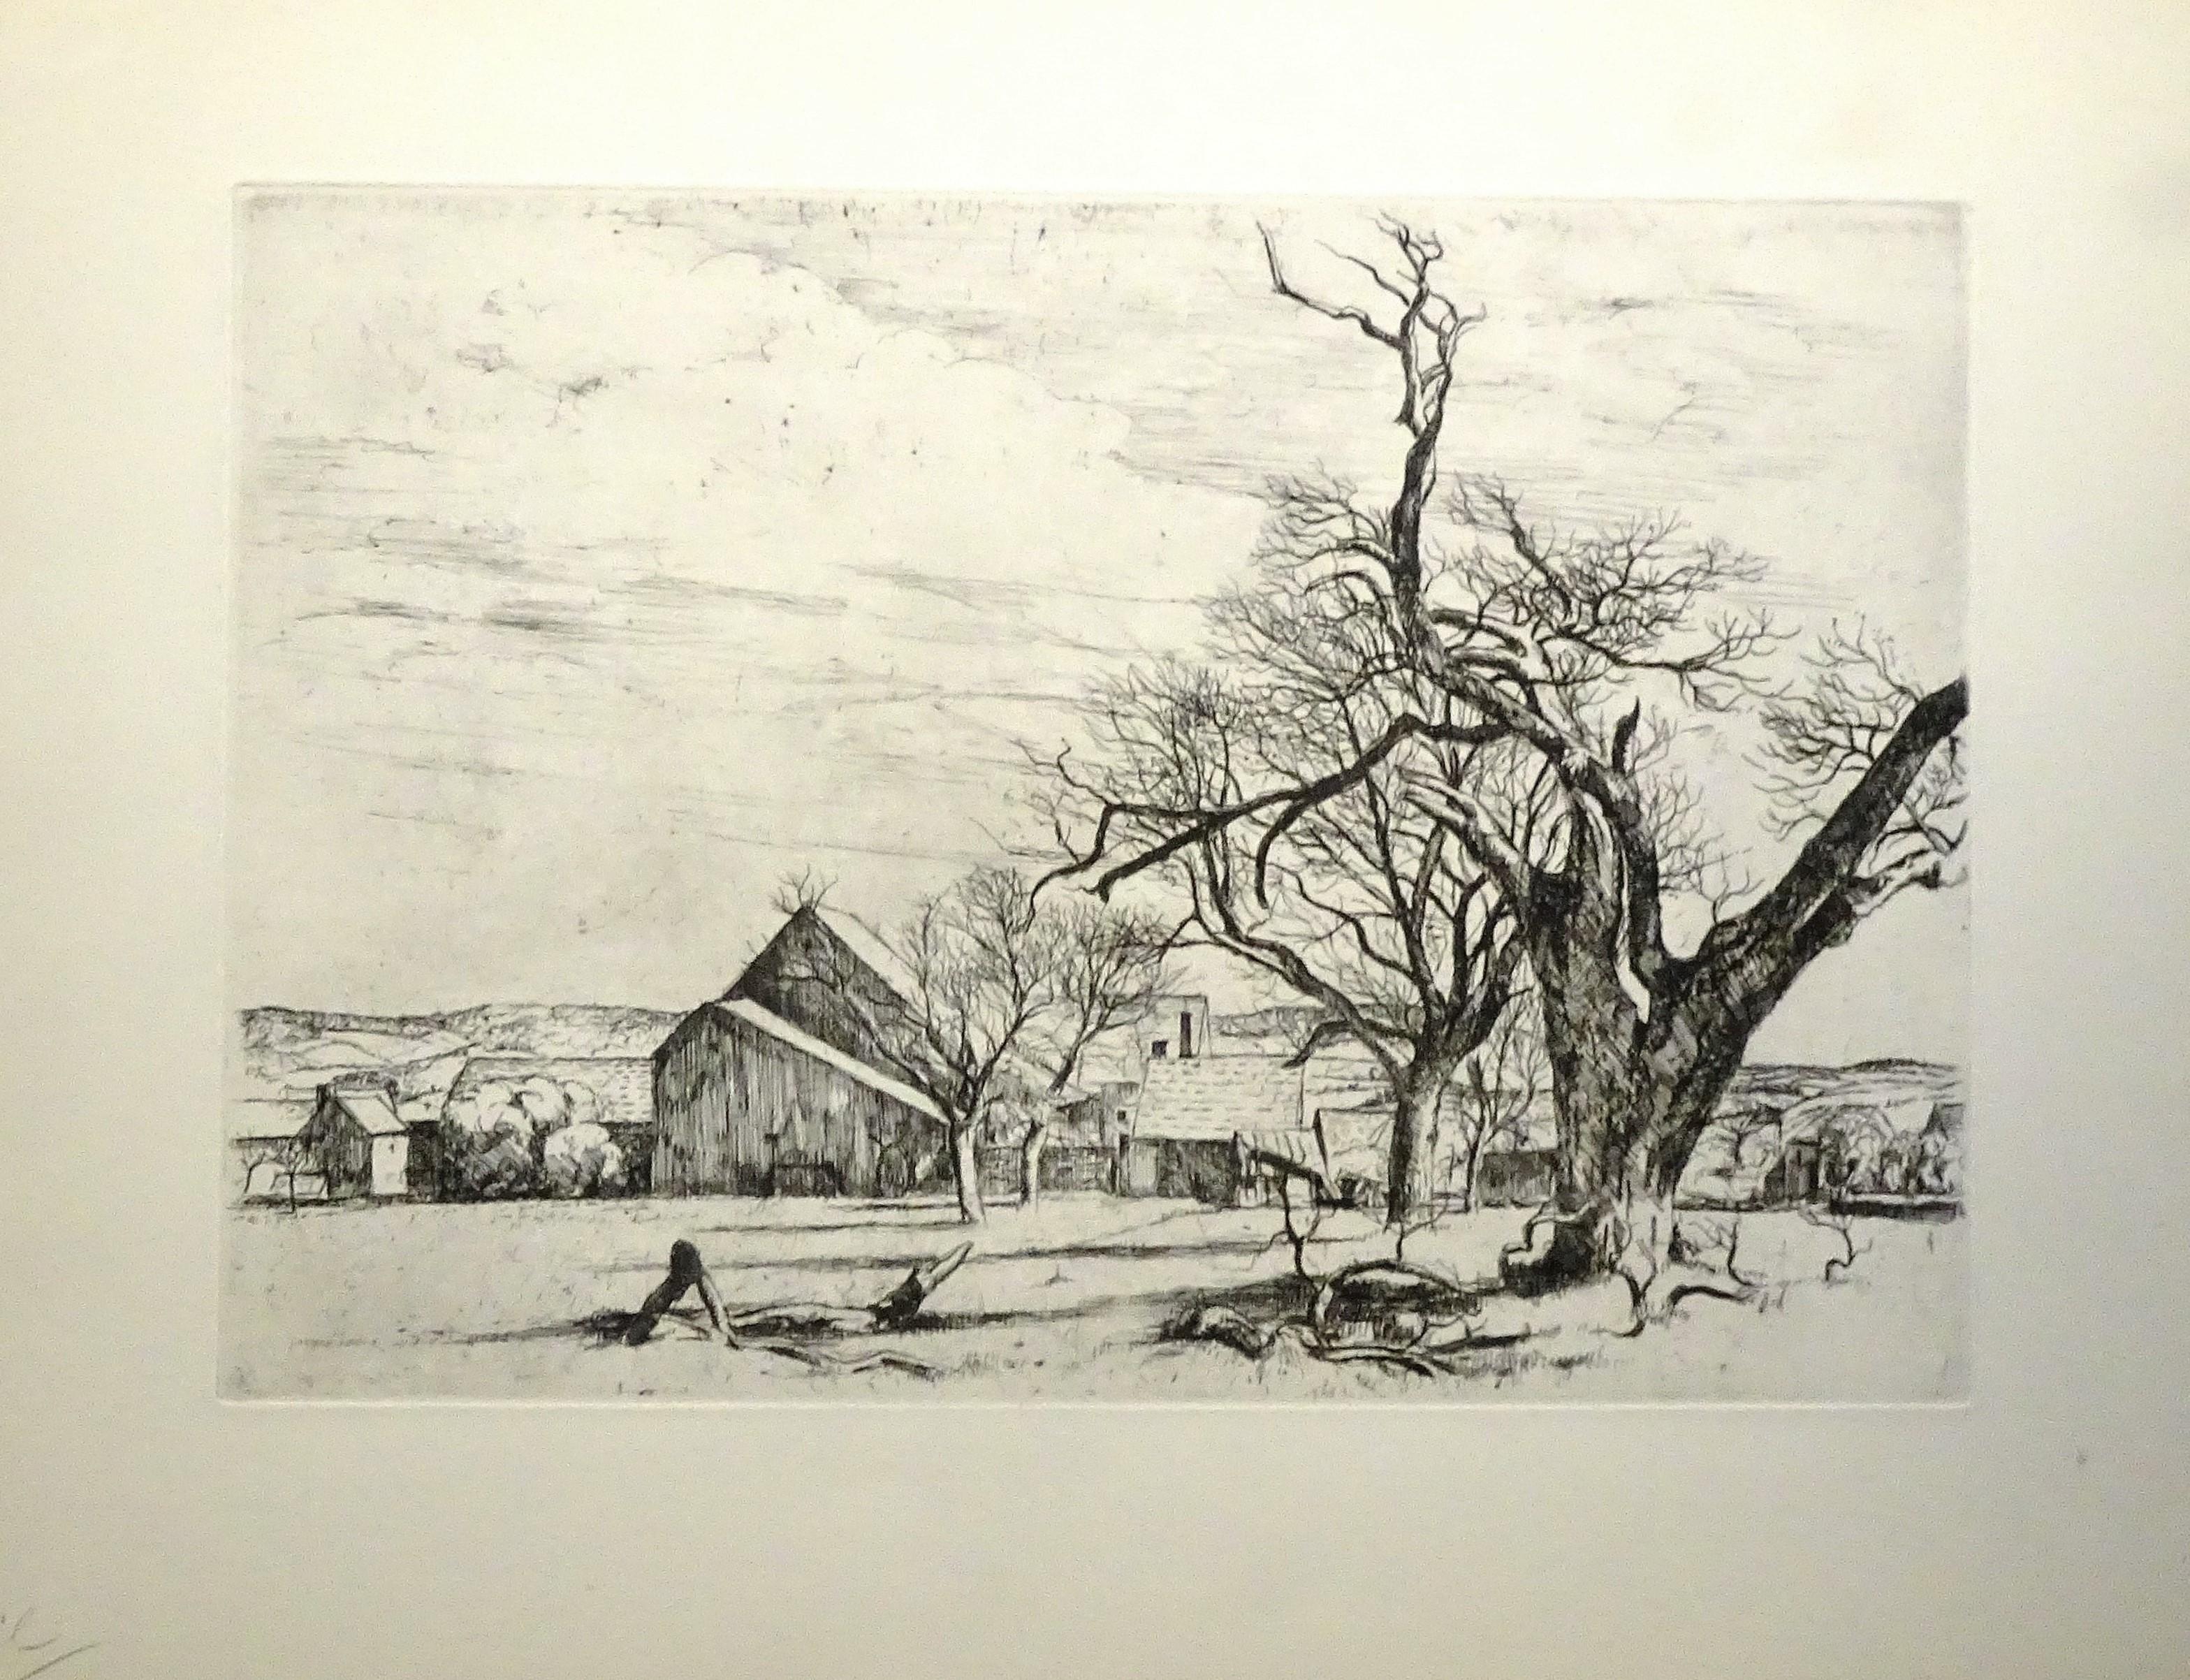 Untitled - Original Etching and Drypoint by Eugène Corneau - 1930s